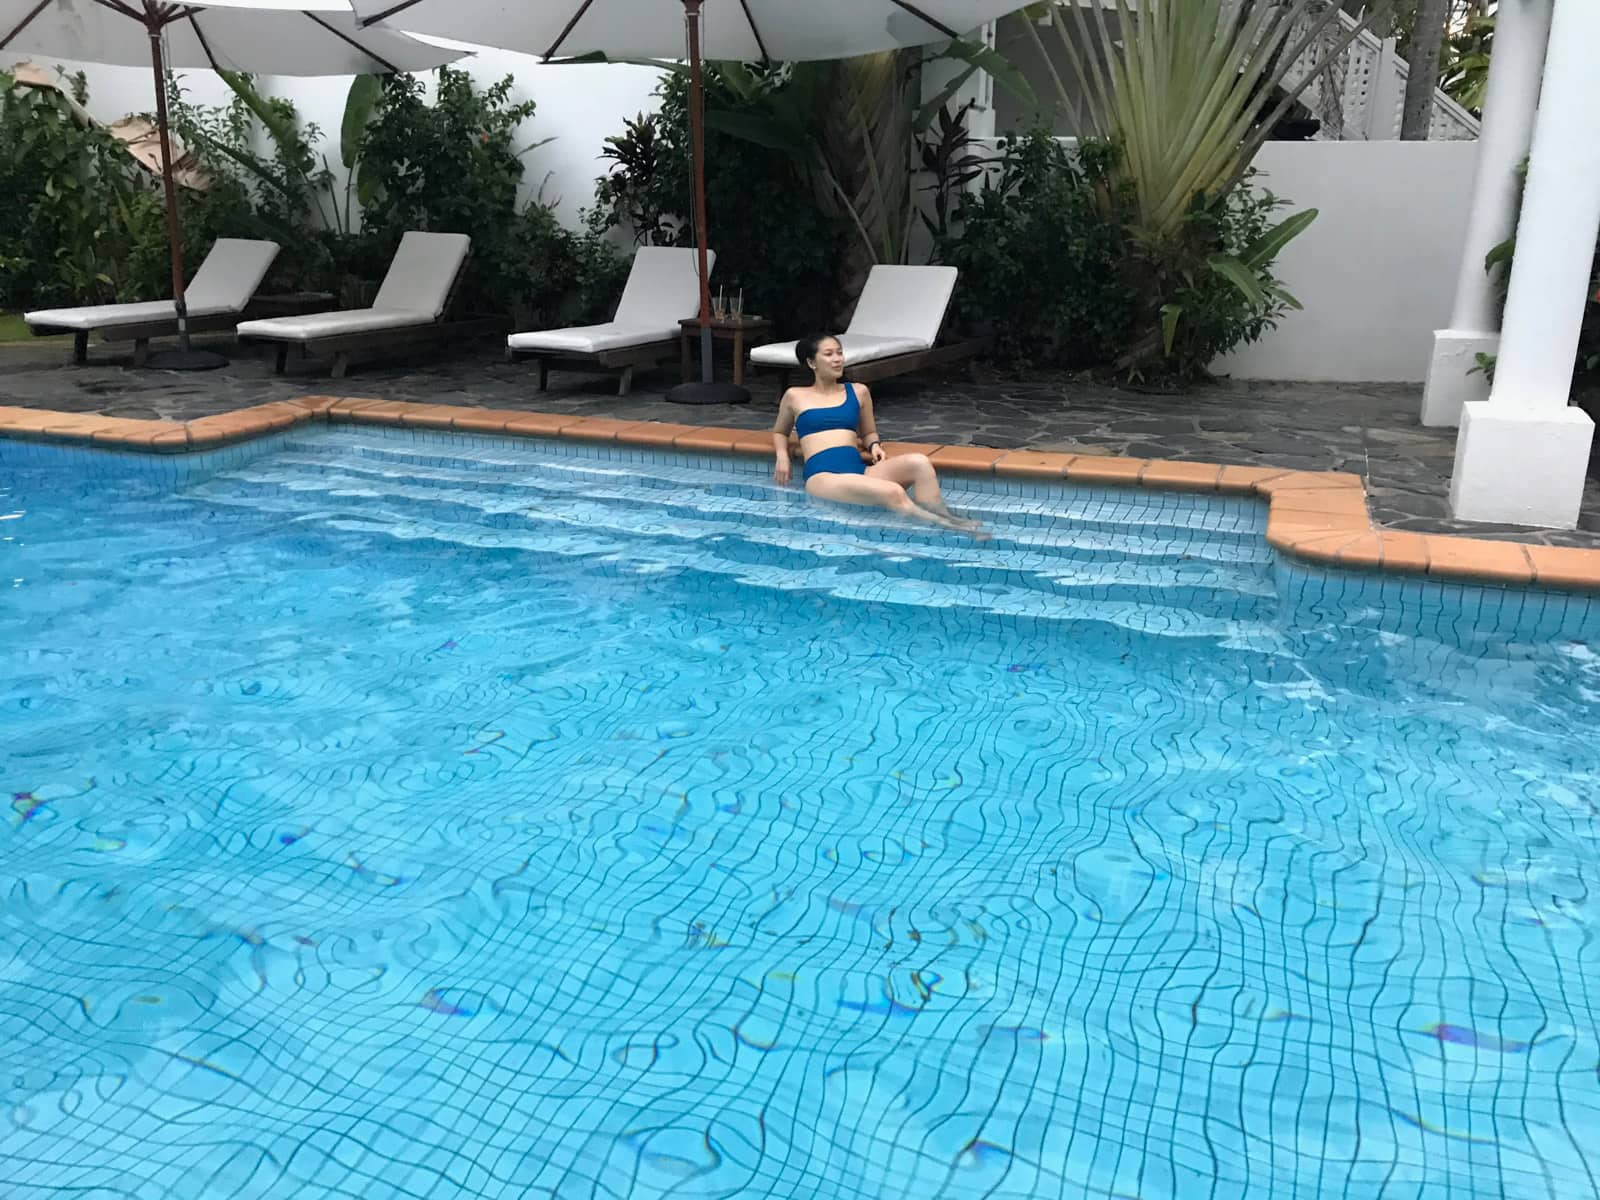 A swimming pool, on the far end are sun beds and partially in the water is a woman in a blue bikini, lying partially on her side. She is looking away from the camera